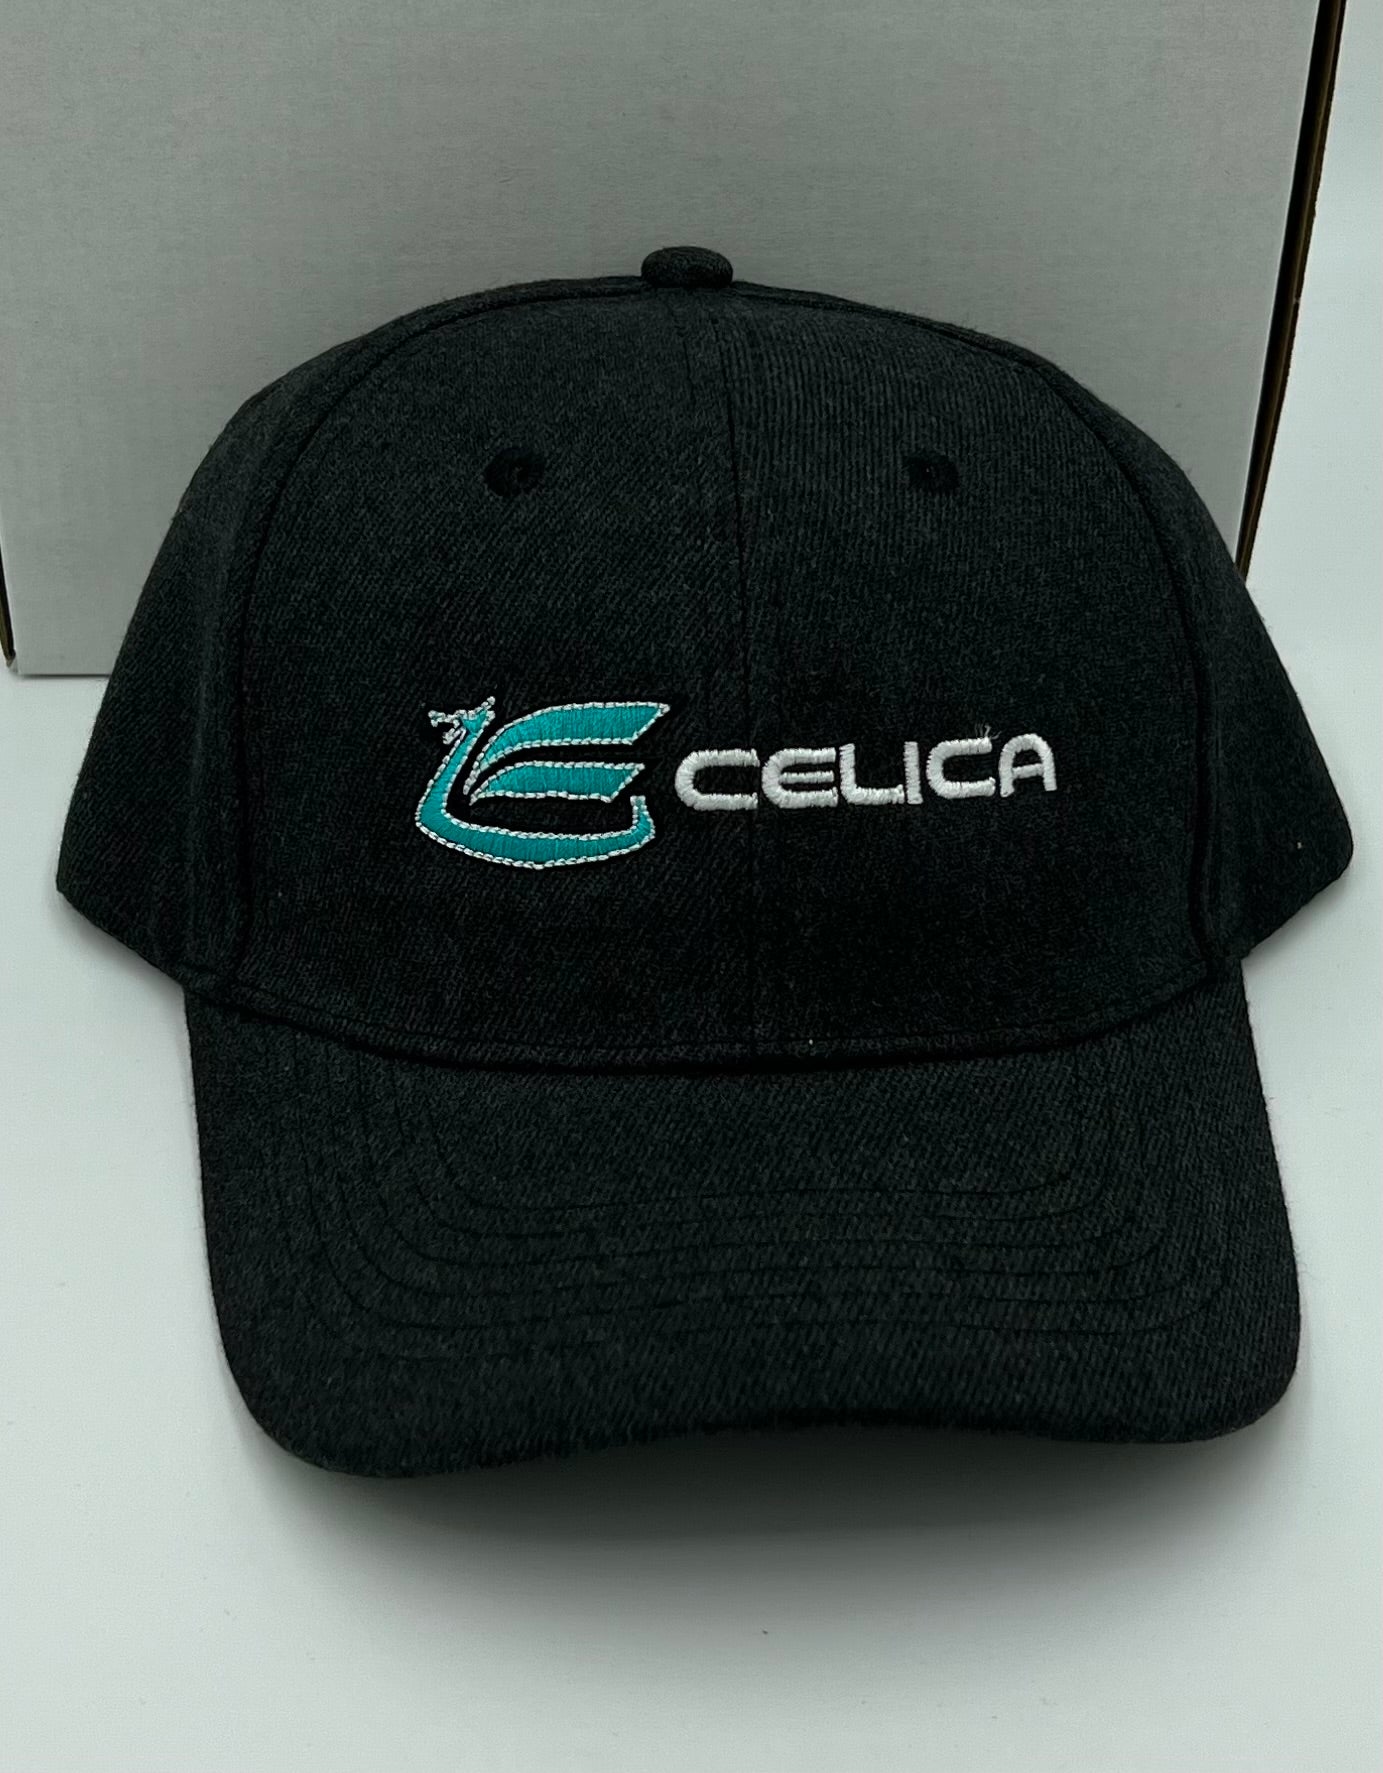 Celica Embroidered Hat